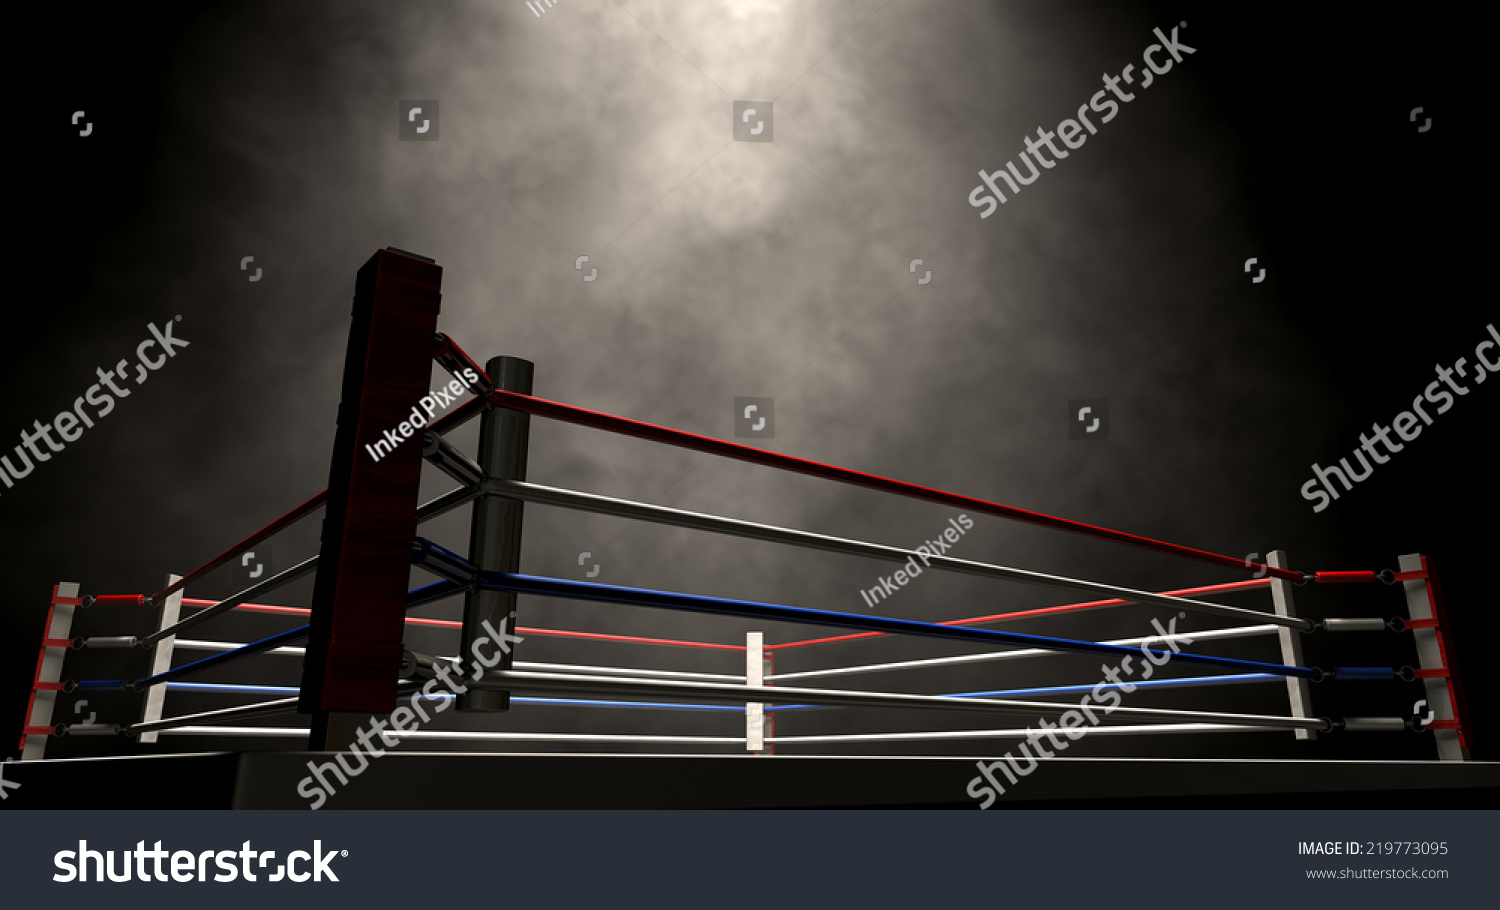 A regular boxing ring surrounded by ropes spotlit in the middle on an isolated dark background #219773095